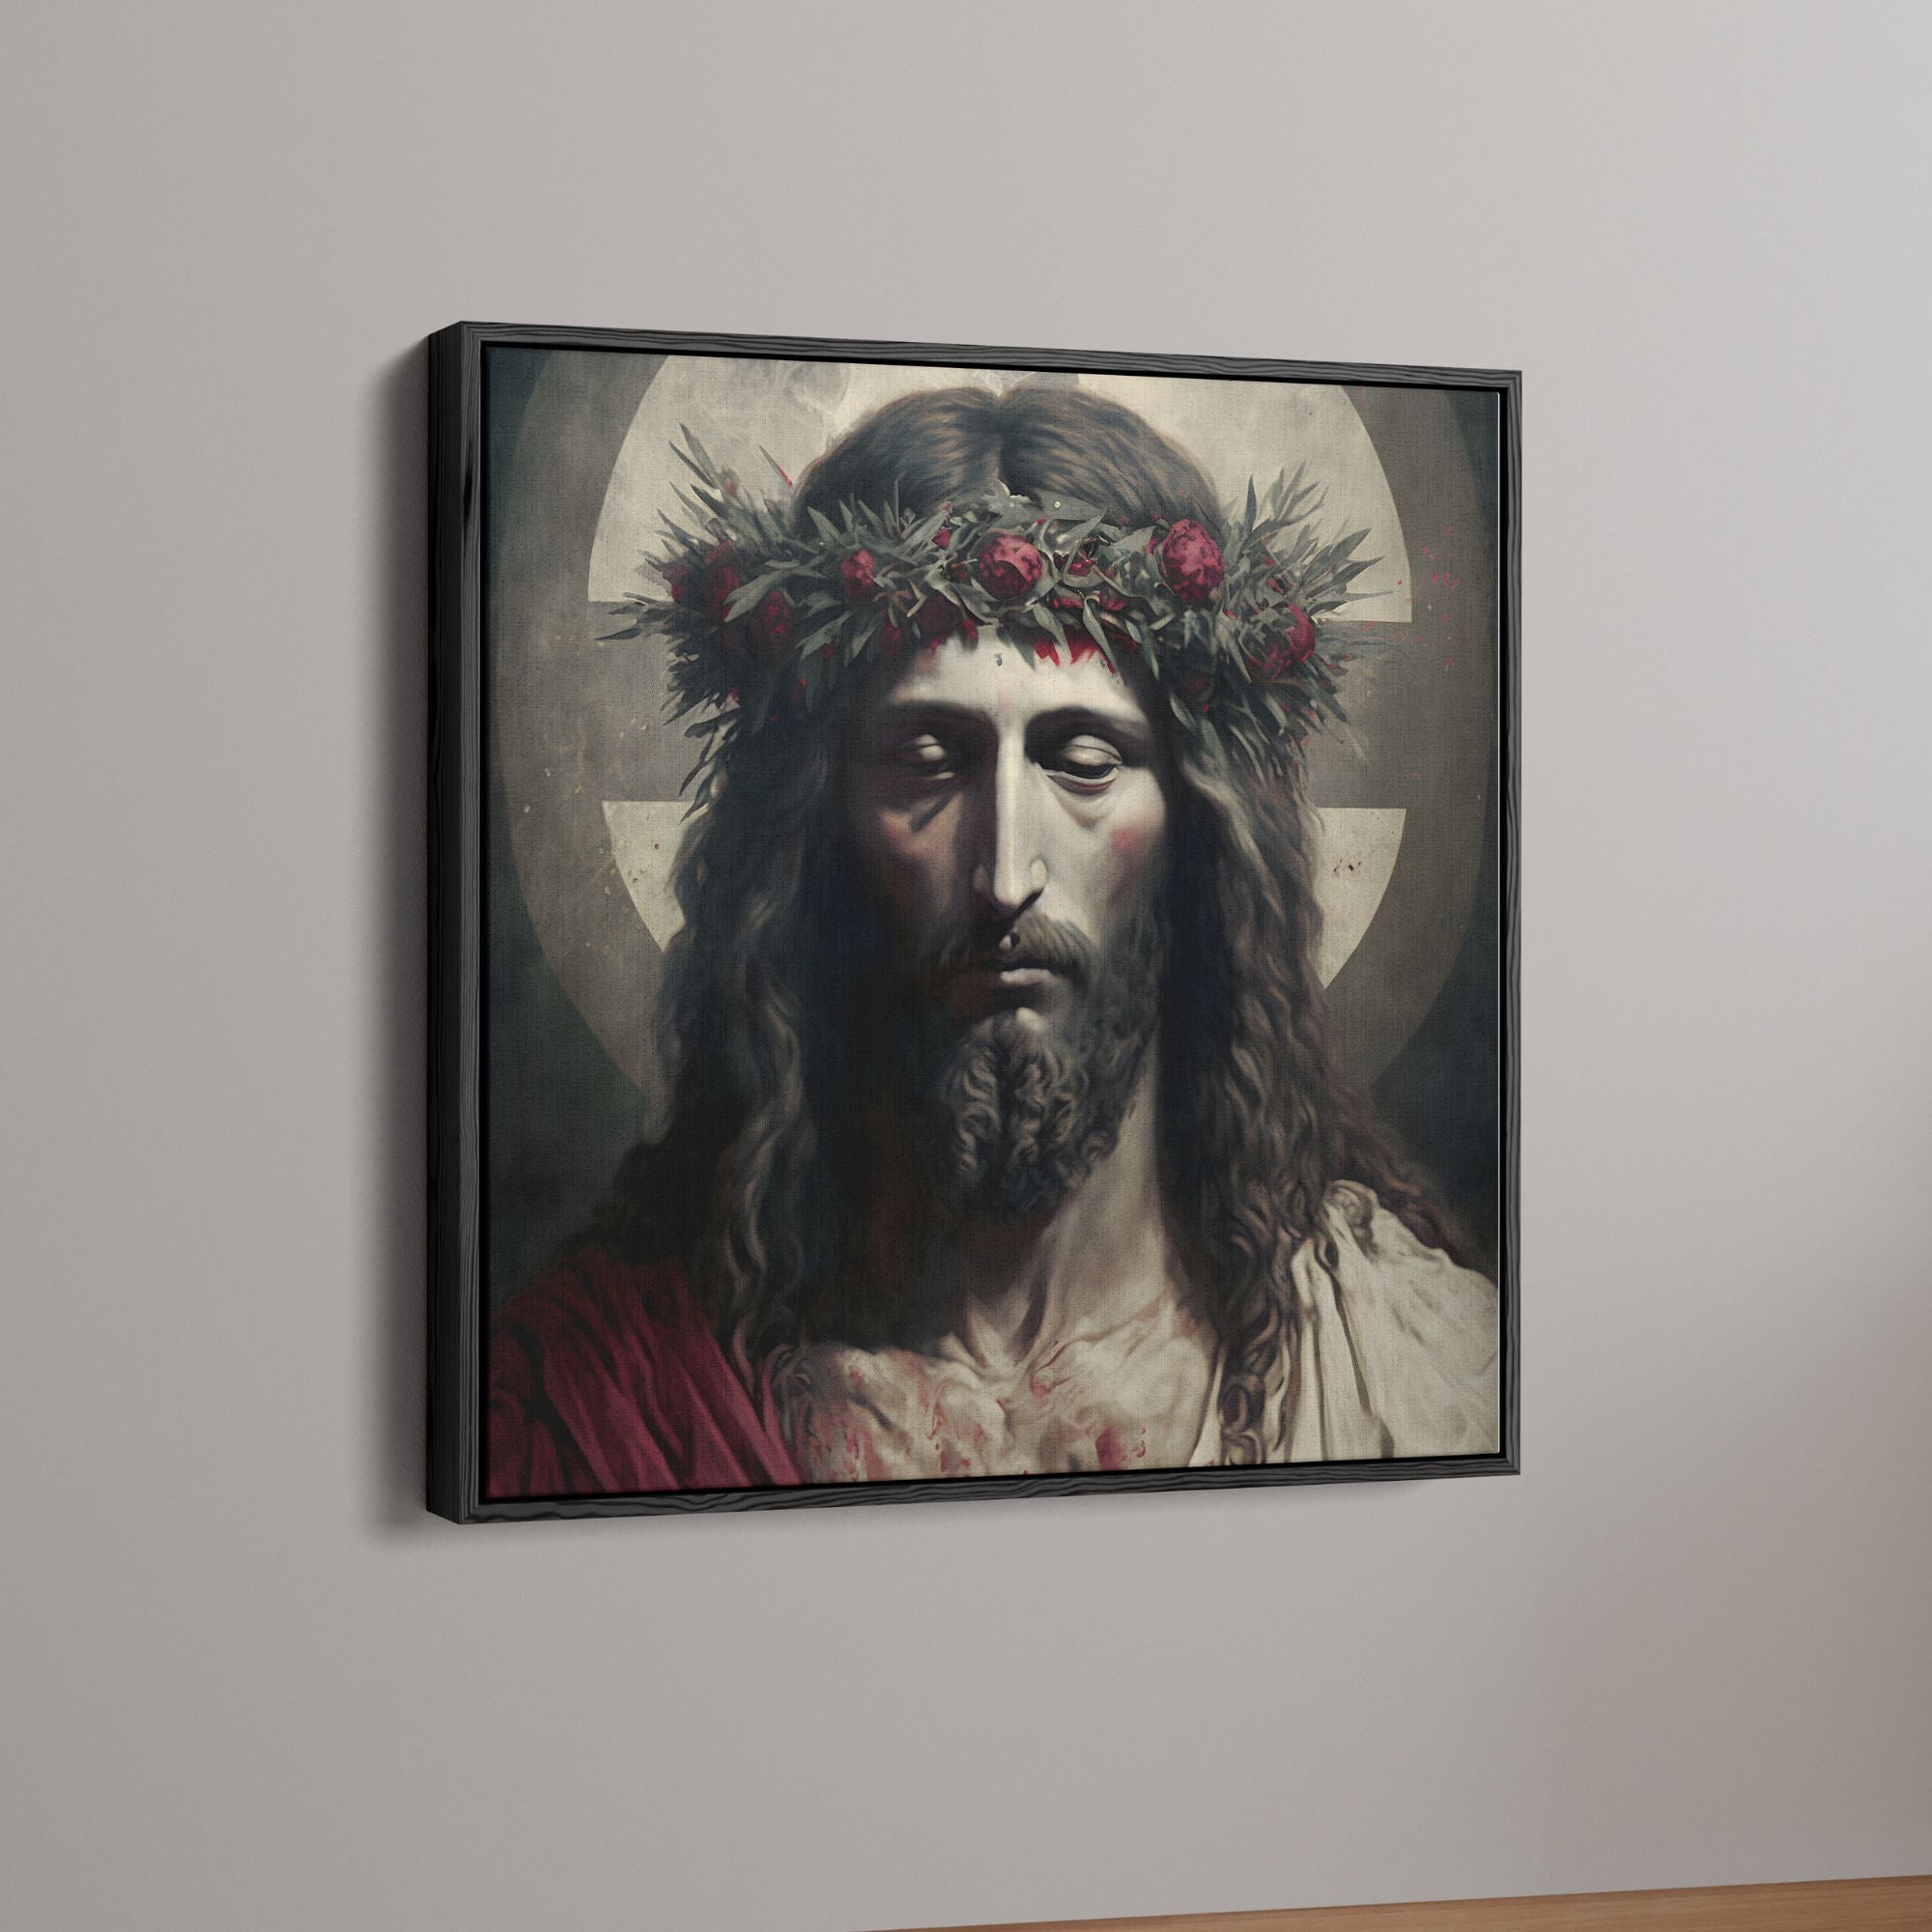 Jesus With Rose Crown On Head Canvas Wall Painting